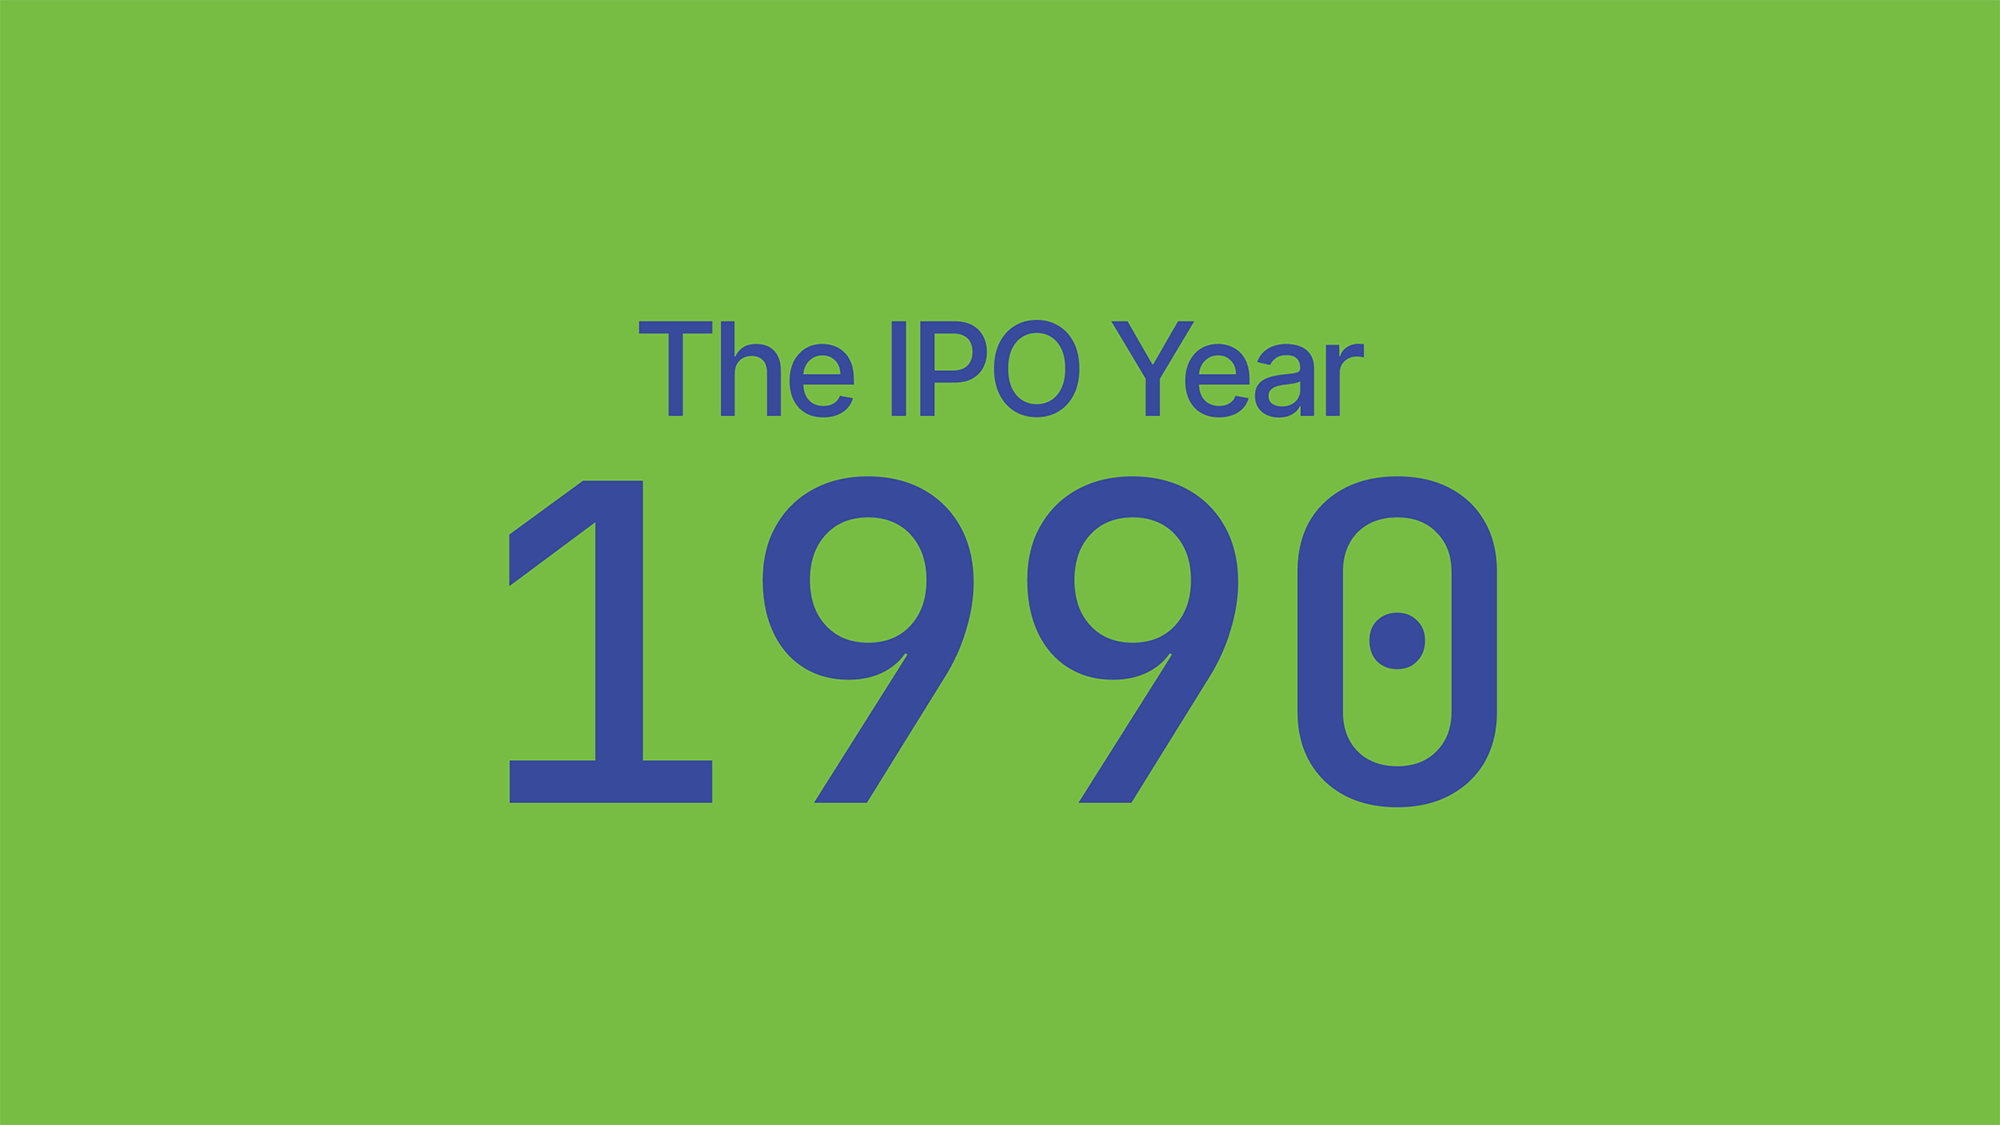 The IPO Year 1990